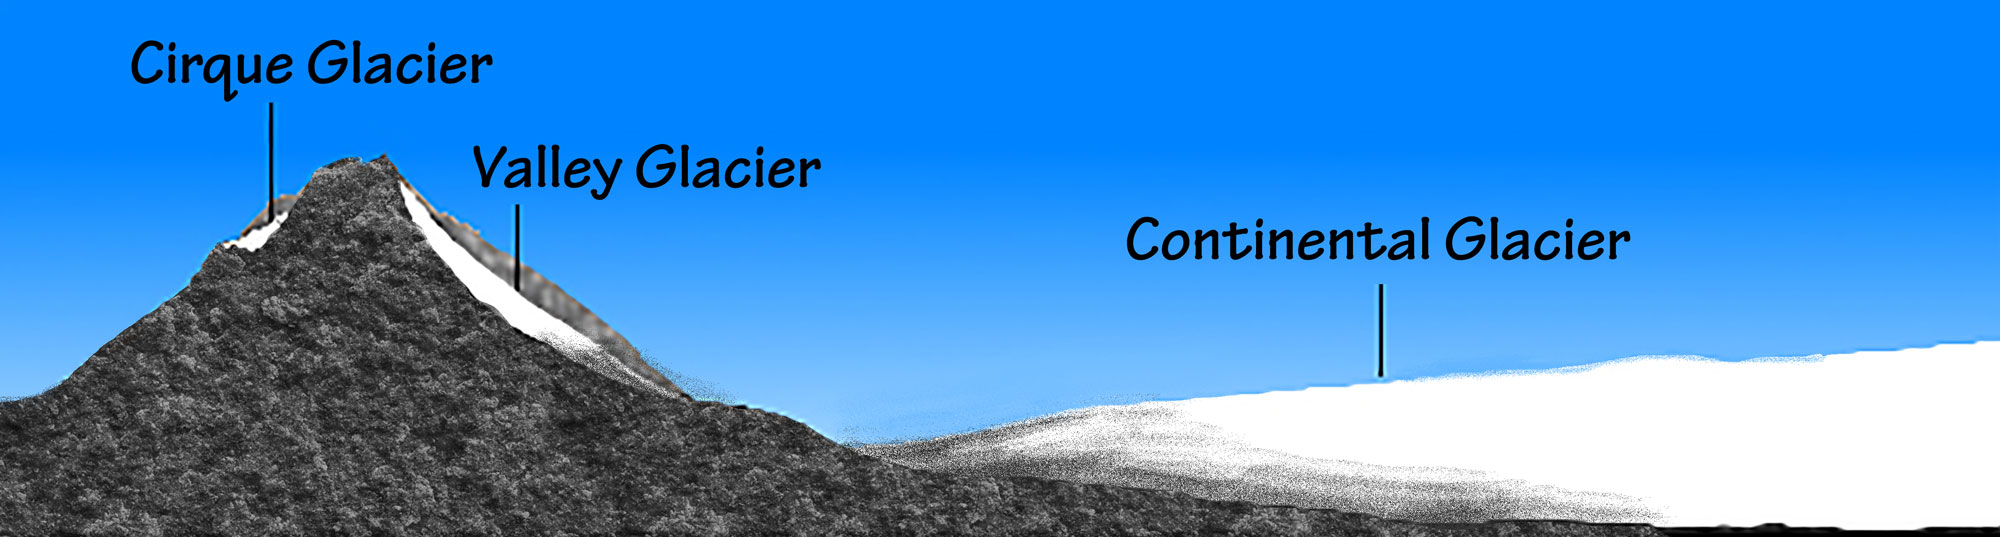 Diagram showing different types of glaciers. The diagram has a triangular mountain peak on the left, with a flat area on the right. On the mountain, a small patch of ice near the top of the peak is labeled a "cirque glacier." A patch of ice extending from high on the peak to near the base is labeled as a "valley glacier." A thick patch of ice sitting on the flat plain is labeled as a "continental glacier."